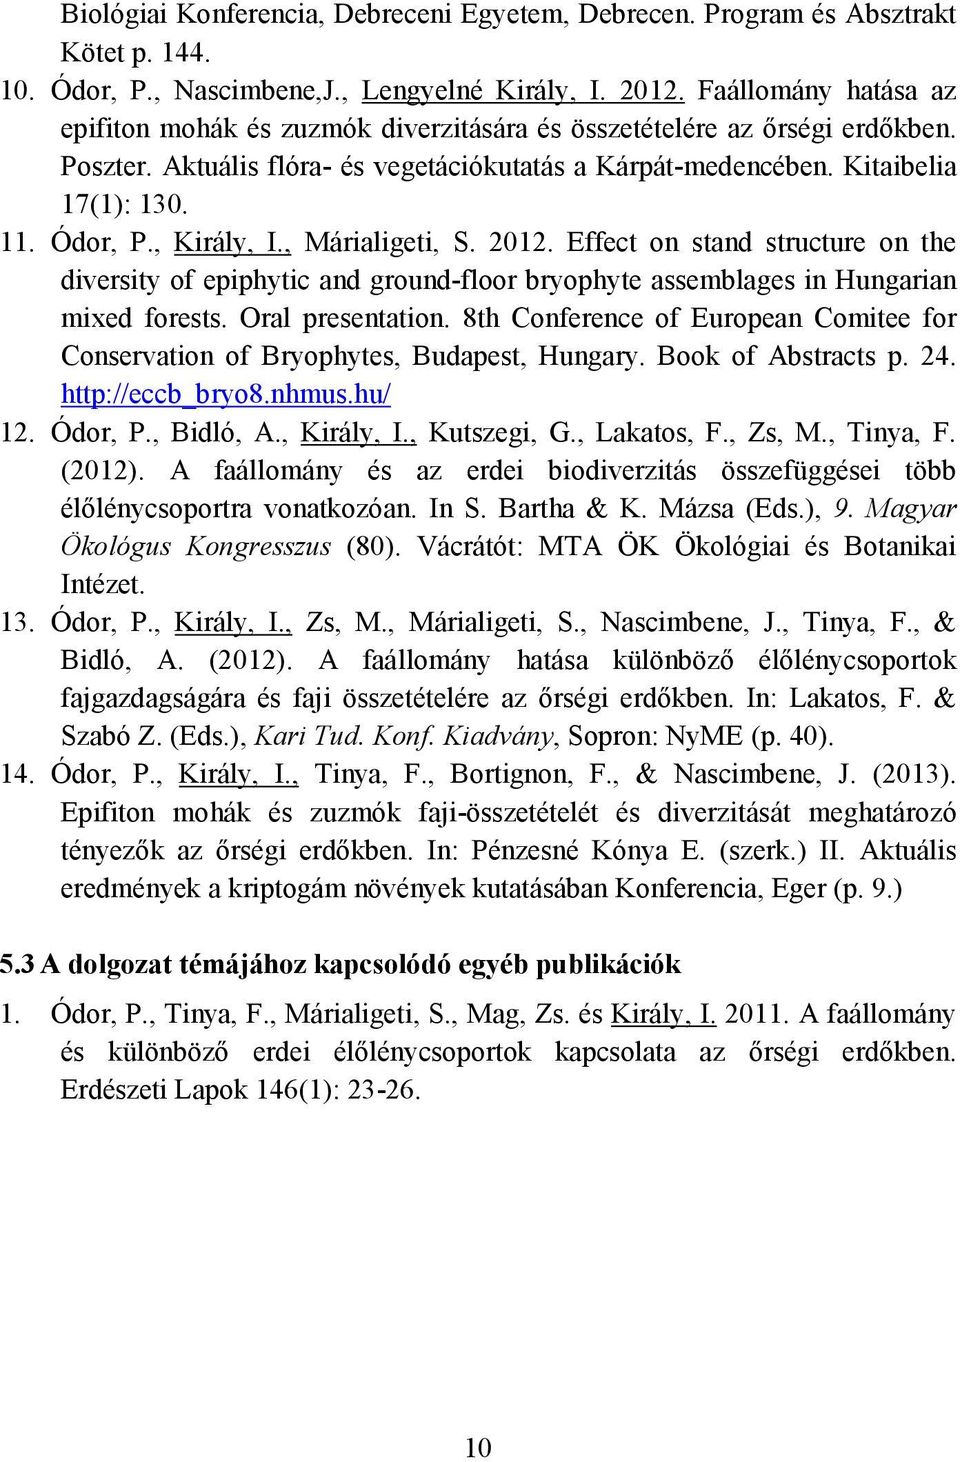 , Király, I., Márialigeti, S. 2012. Effect on stand structure on the diversity of epiphytic and ground-floor bryophyte assemblages in Hungarian mixed forests. Oral presentation.